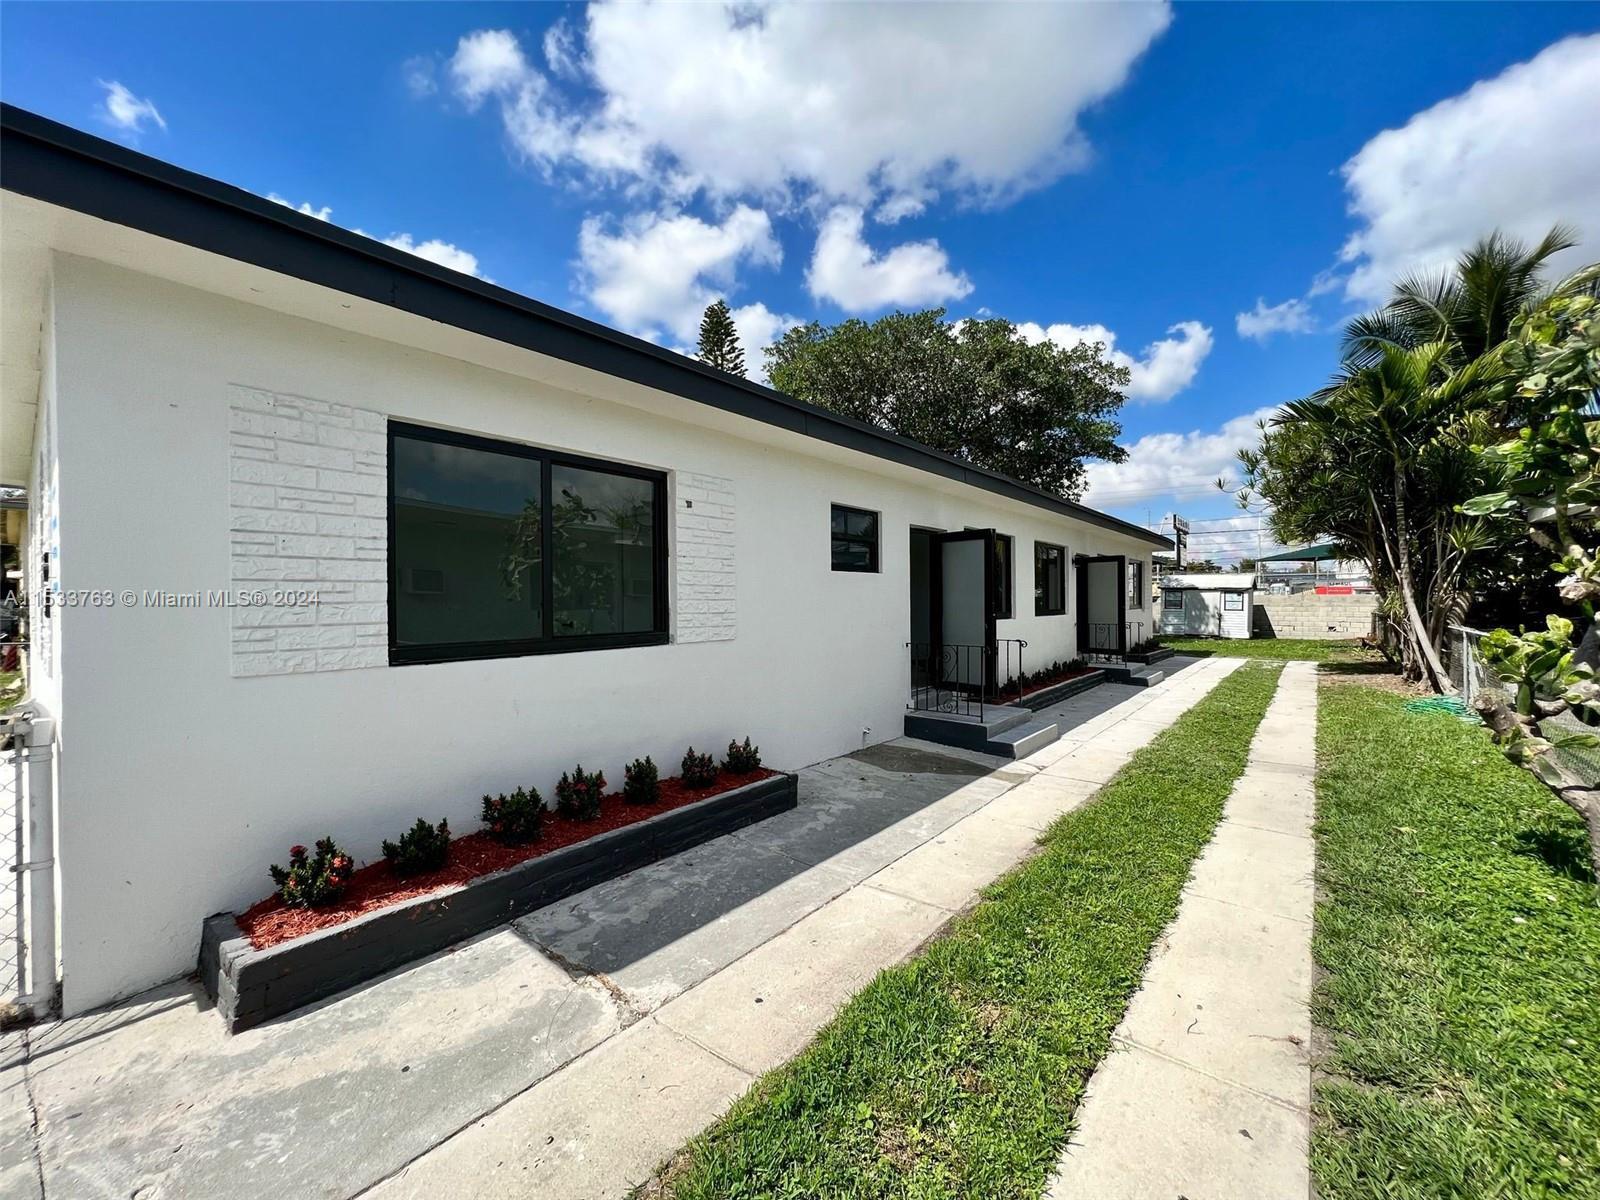 Photo of 2465 NW 35th St in Miami, FL